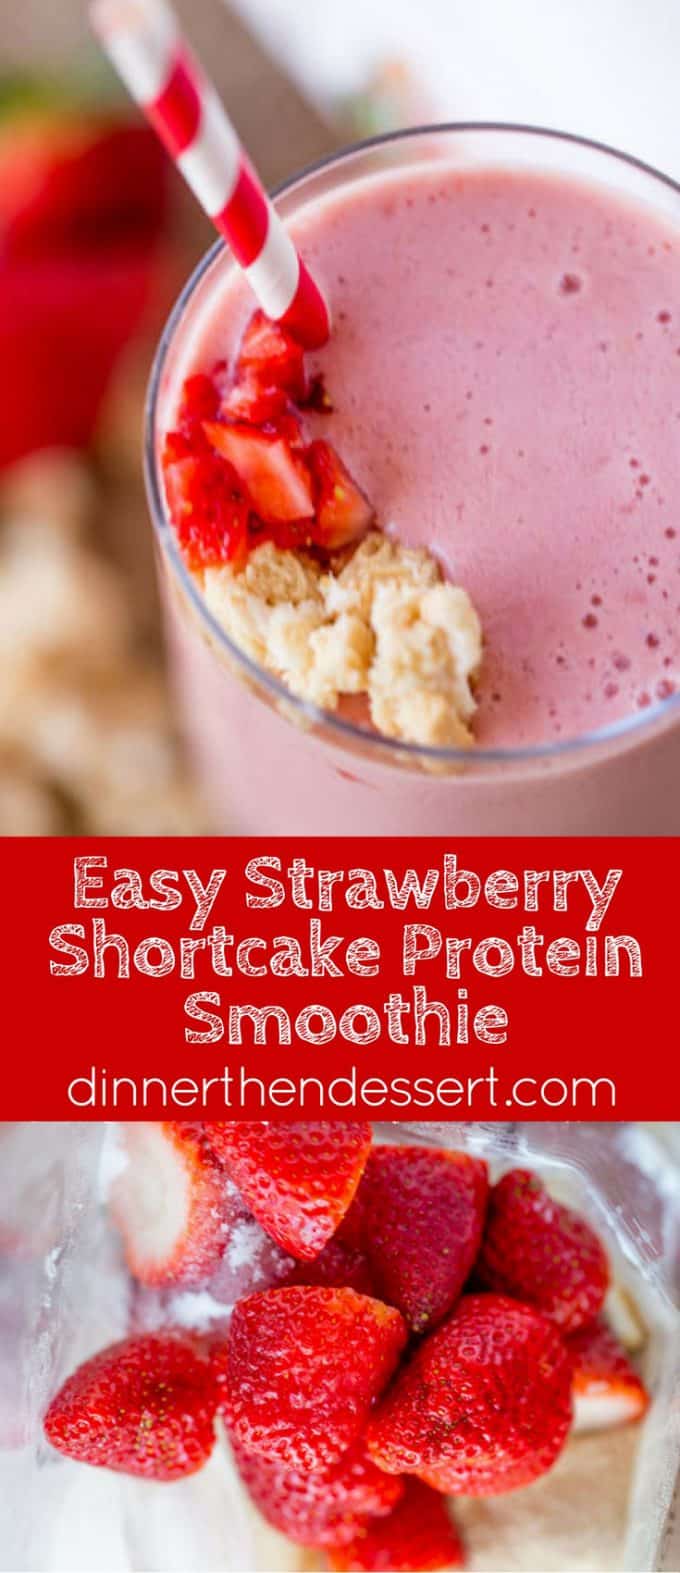 Strawberry Shortcake Smoothie made with Burt’s Bees Vanilla Protein Shake powder makes the most amazing cake-y healthy smoothie you'll want to help shake up healthier eating. 